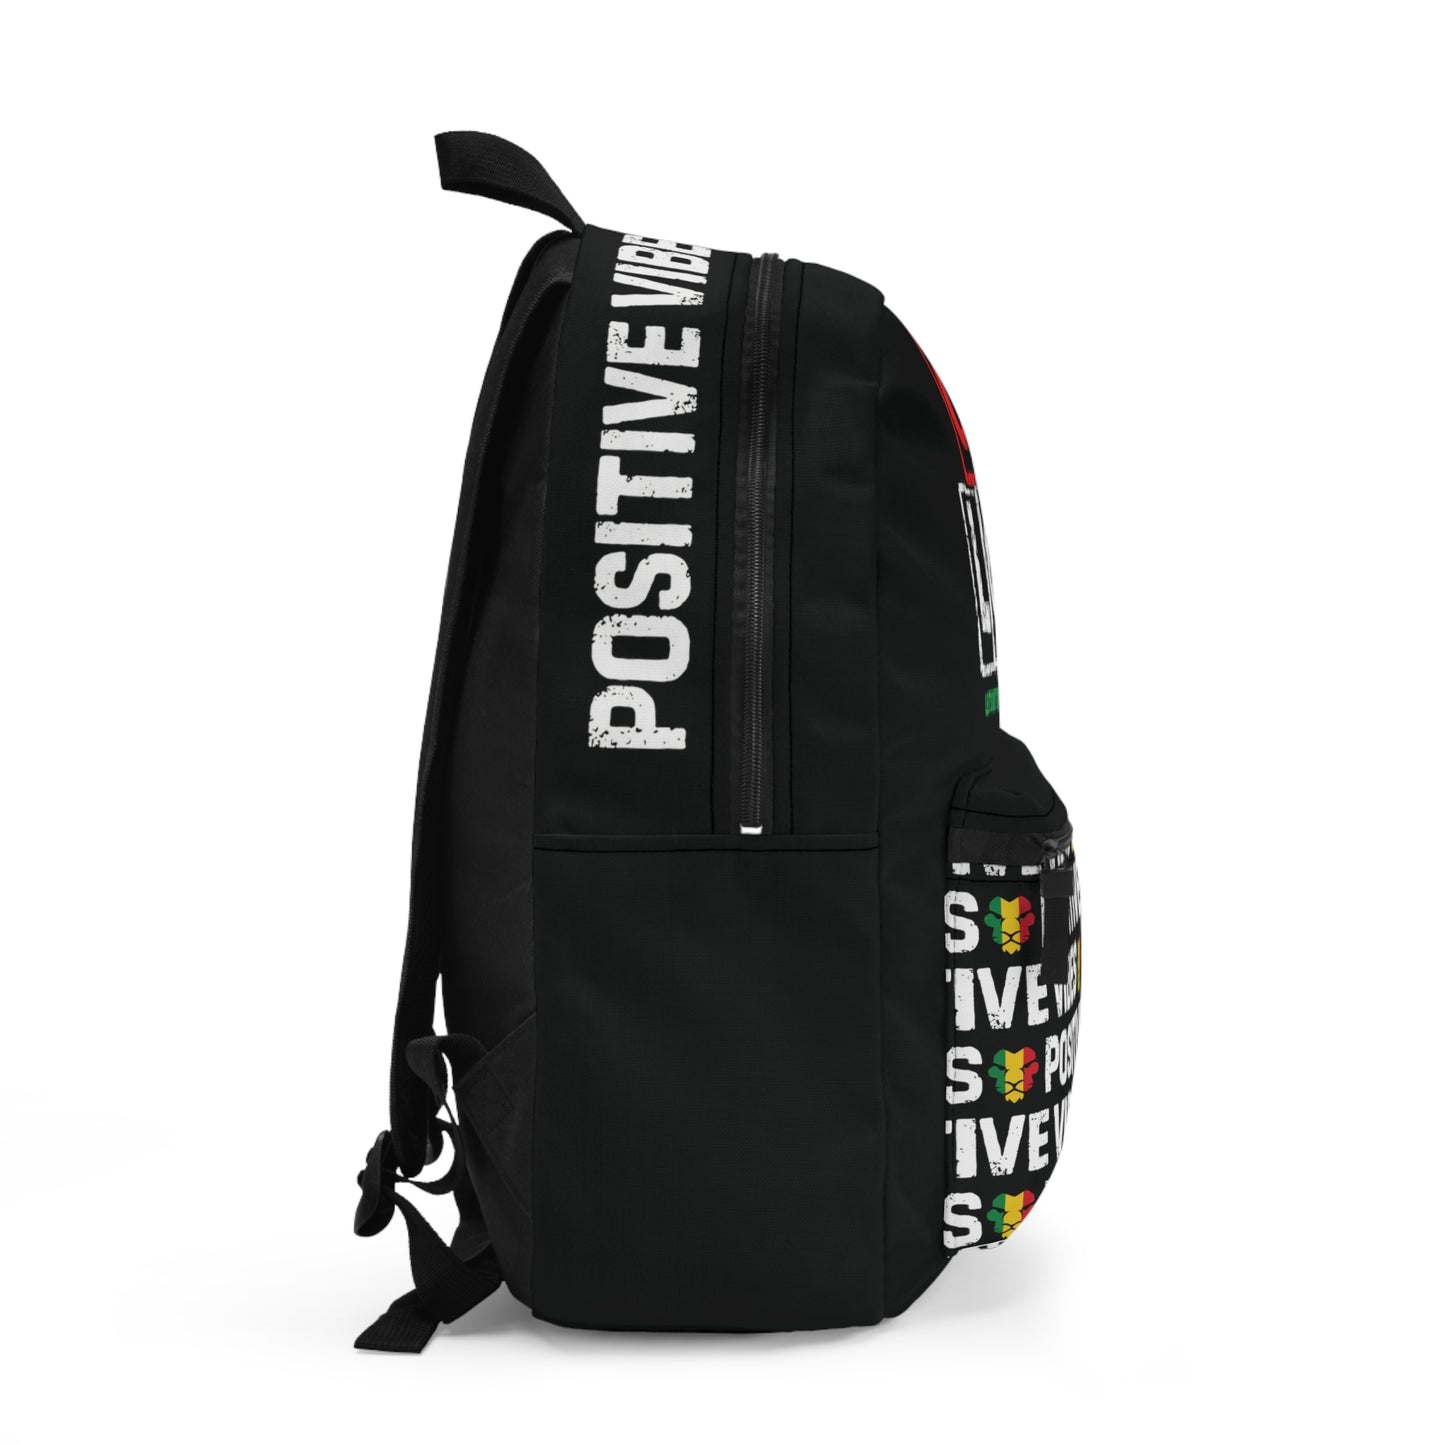 One Love (Juneteenth) Backpack